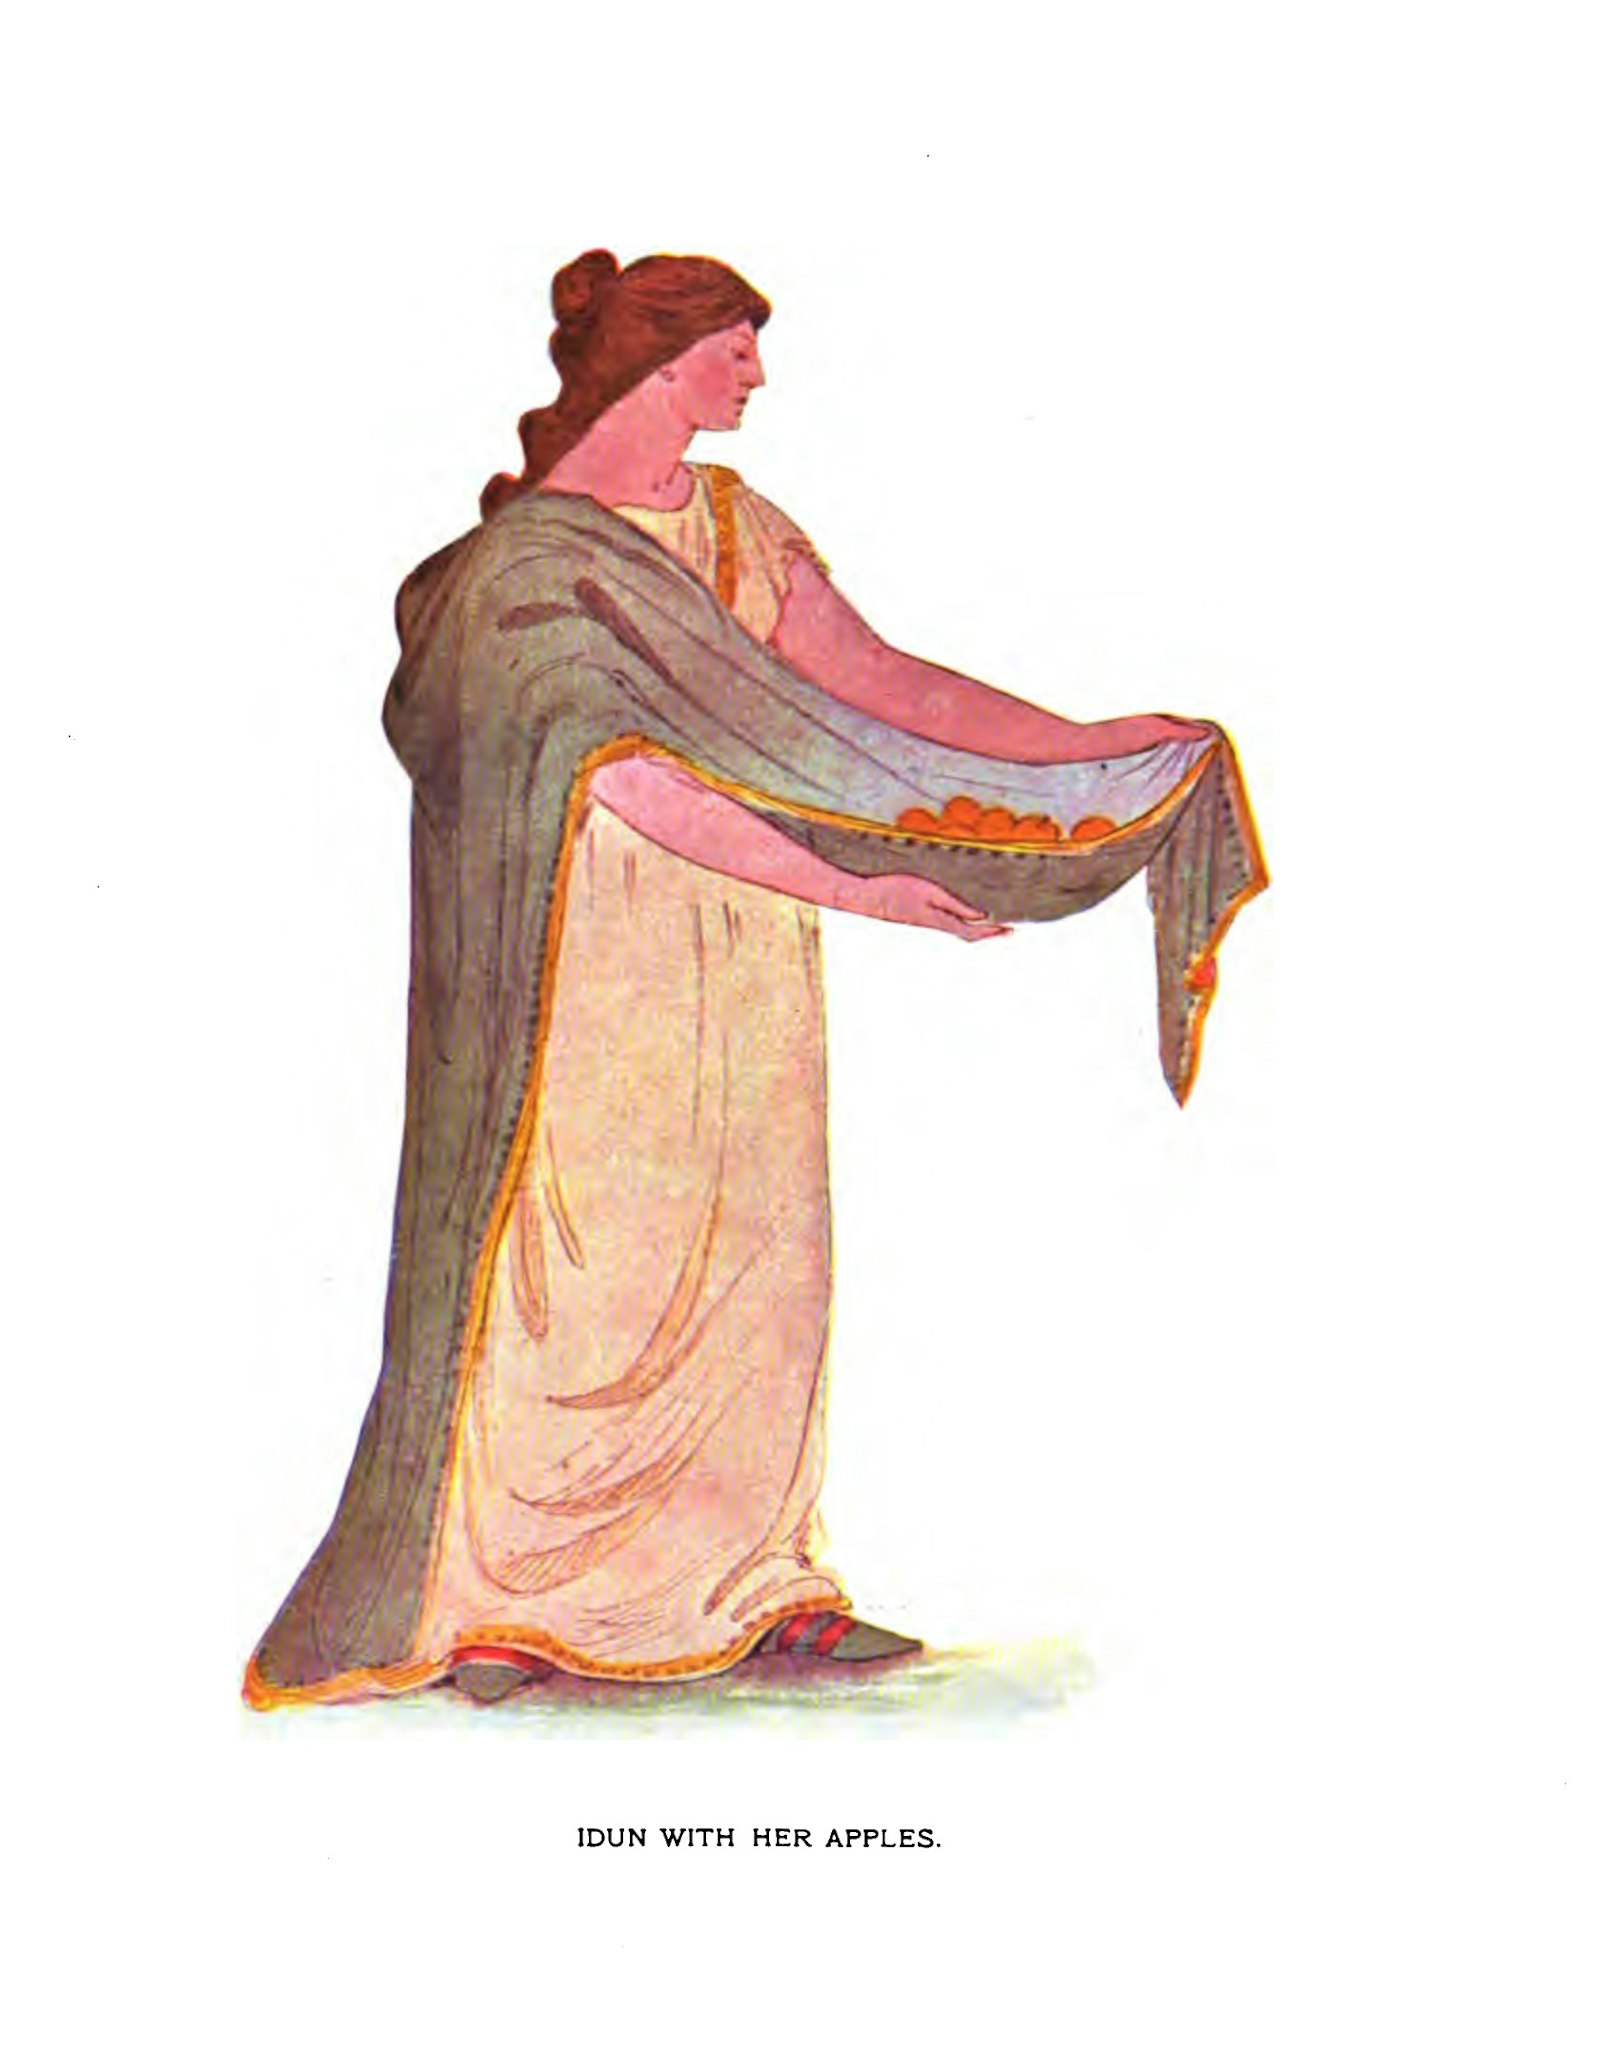 Idun with her apples book illustration (1896)